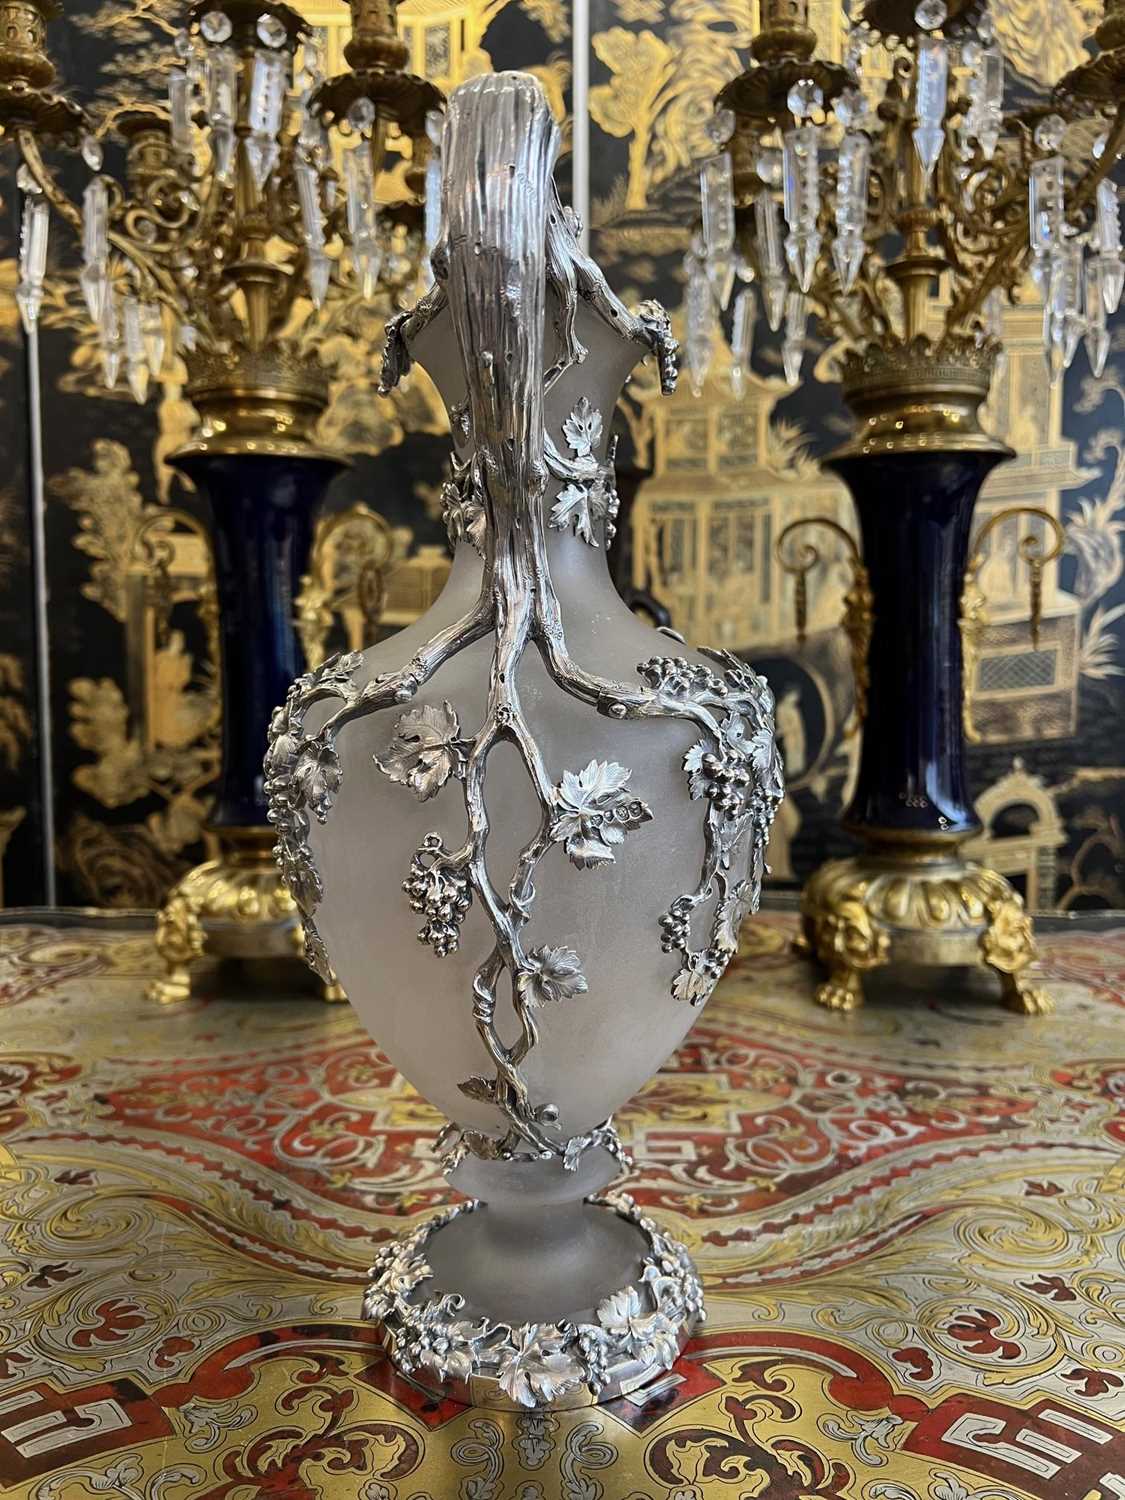 A MAGNIFICENT STERLING SILVER AND FROSTED GLASS CLARET JUG BY MORTIMER & HUNT, 1843 - Image 4 of 10